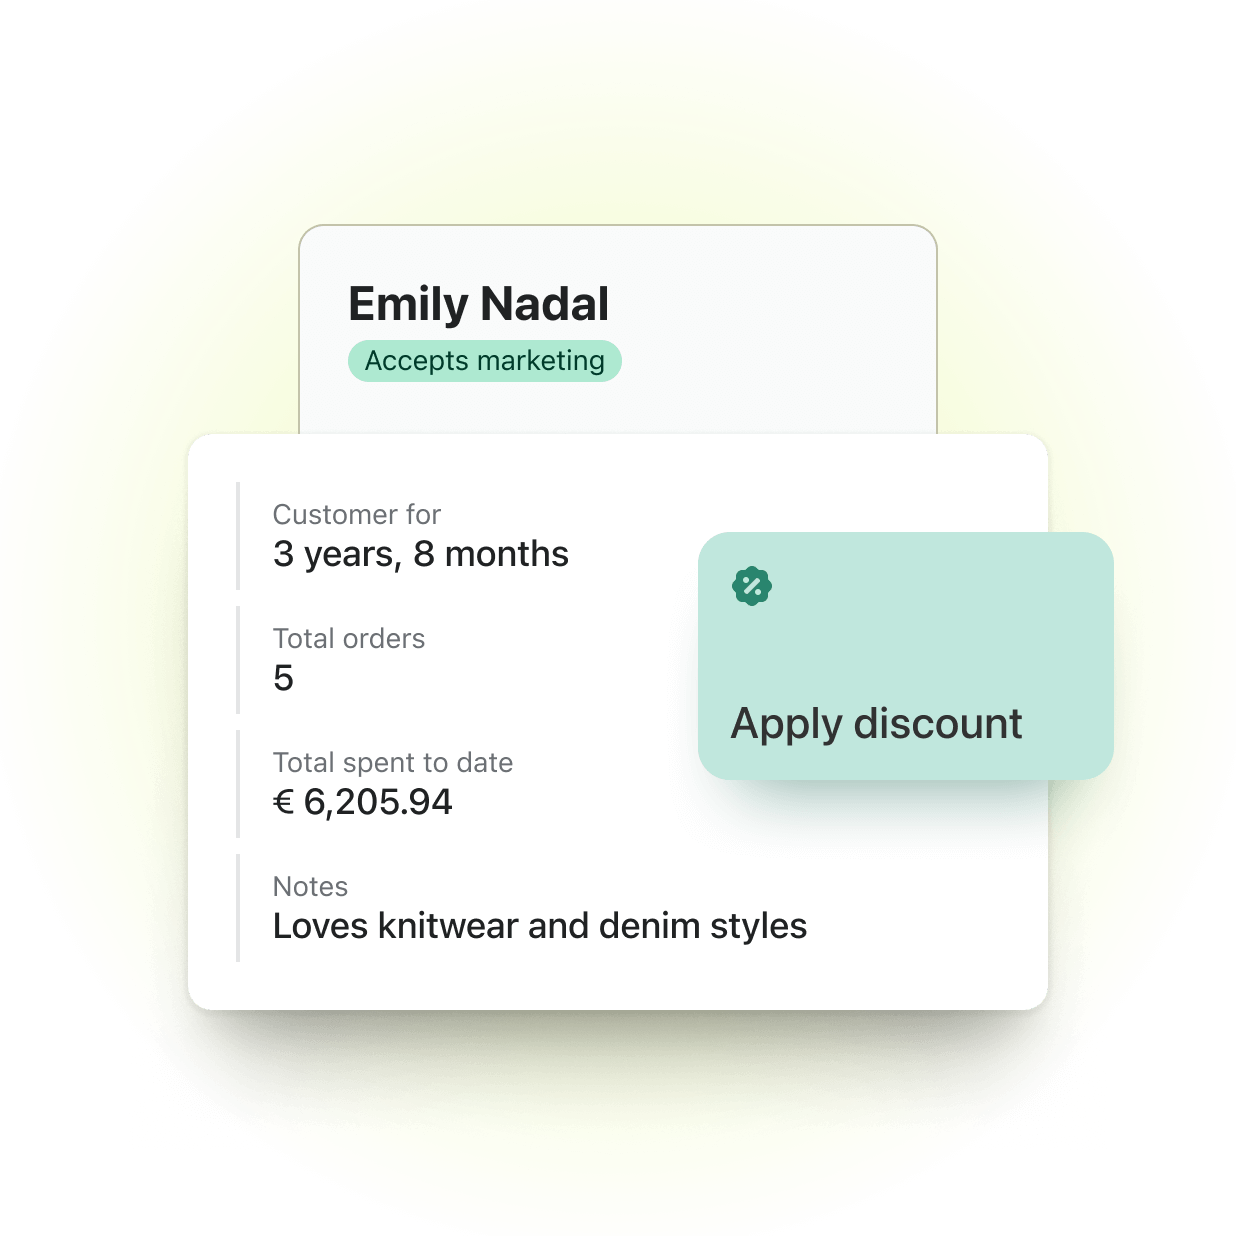 A small snapshot of the Shopify Point of Sale channel from the admin displaying the custom notes and buying history of a customer named Emily Nadal.